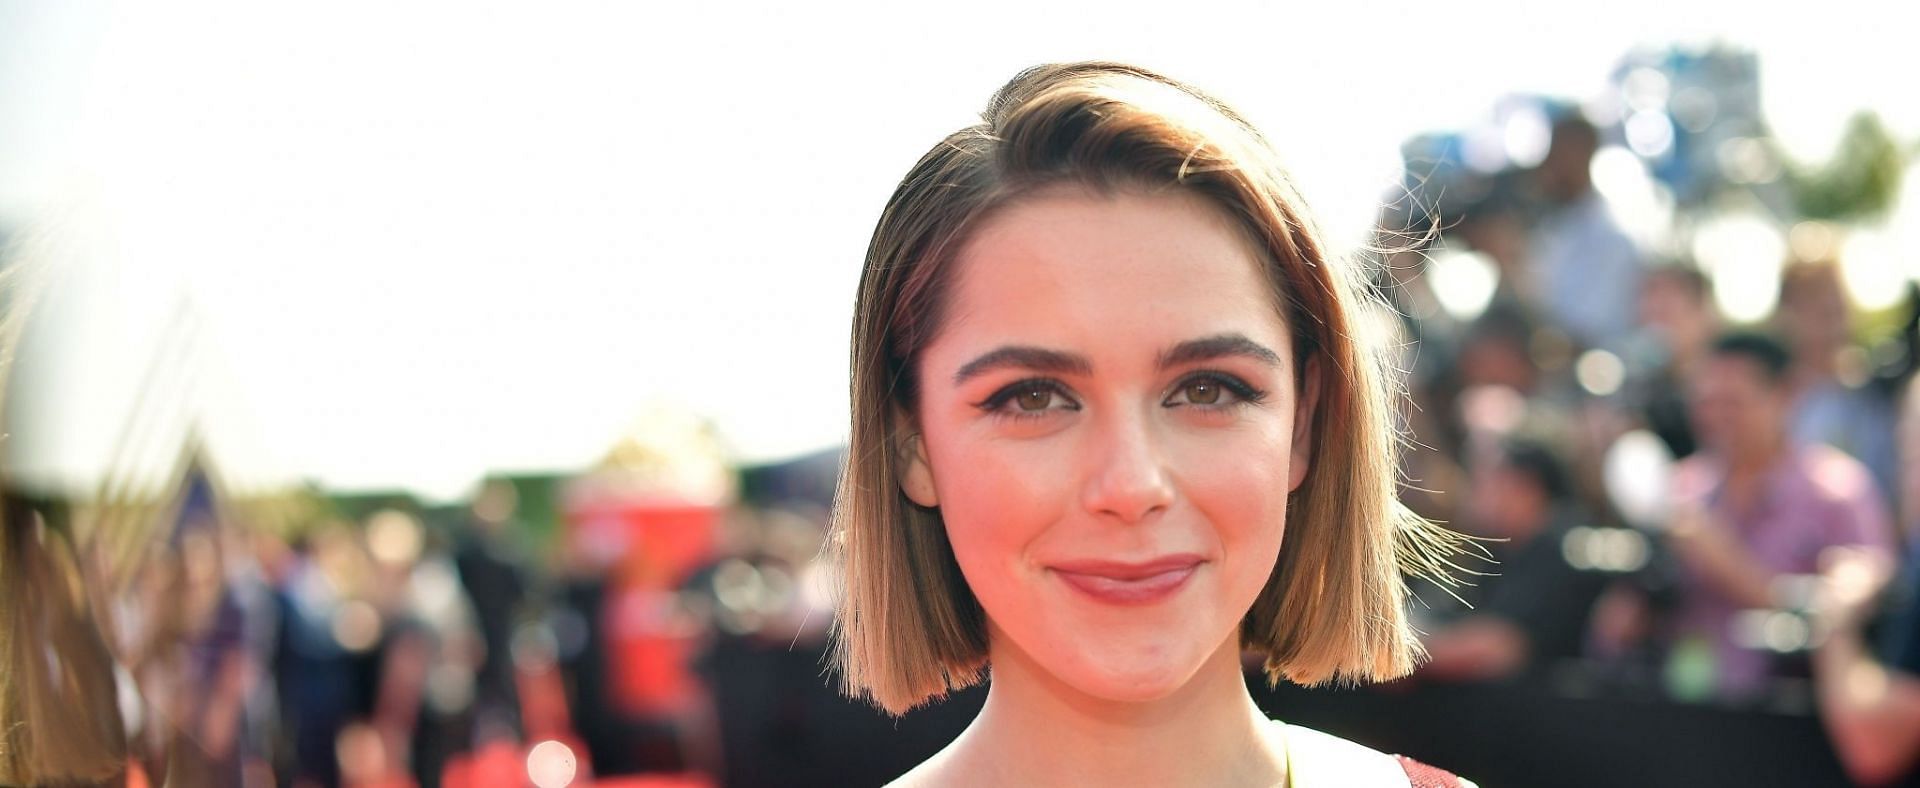 Kiernan Shipka is best known for playing the lead role in &#039;Chilling Adventures of Sabrina&#039; (Image via Matt Winkelmeyer/Getty Images)